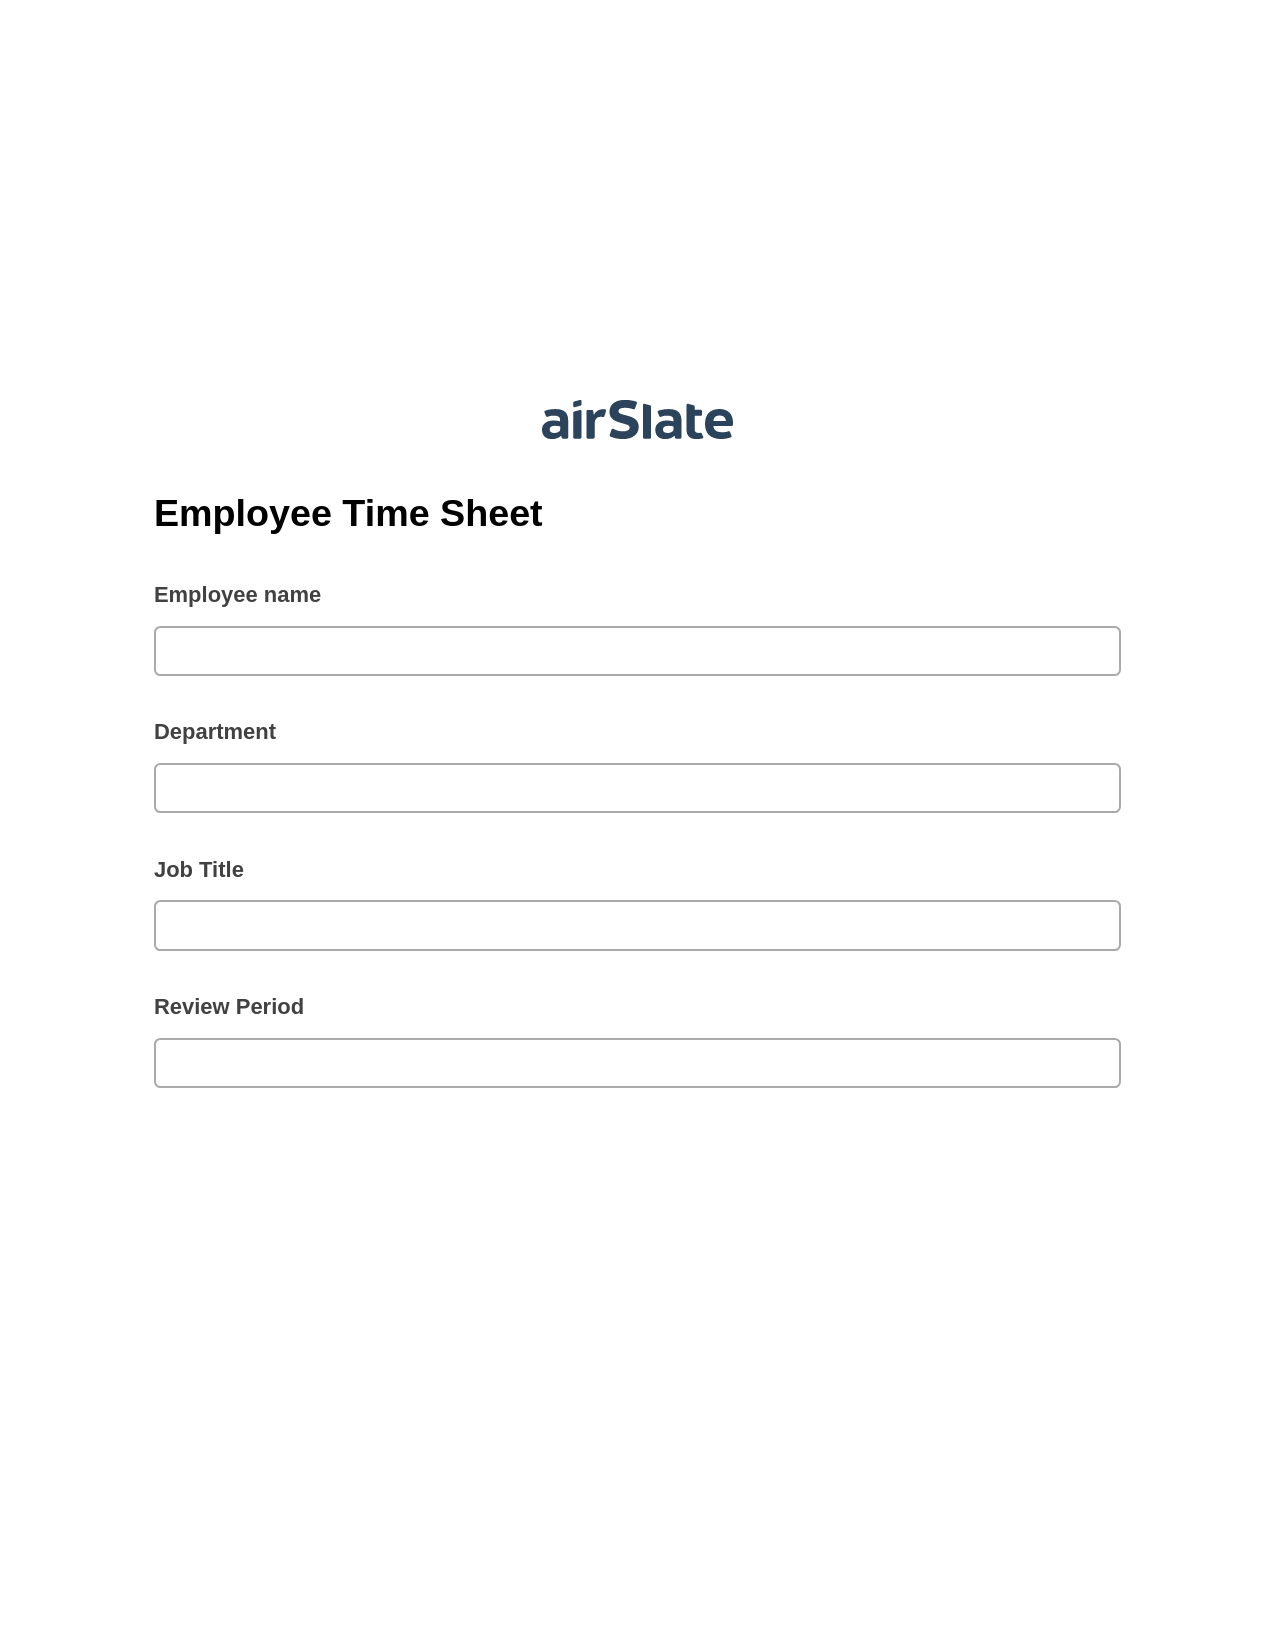 Employee Time Sheet Pre-fill from MySQL Bot, Update Audit Trail Bot, Export to NetSuite Bot